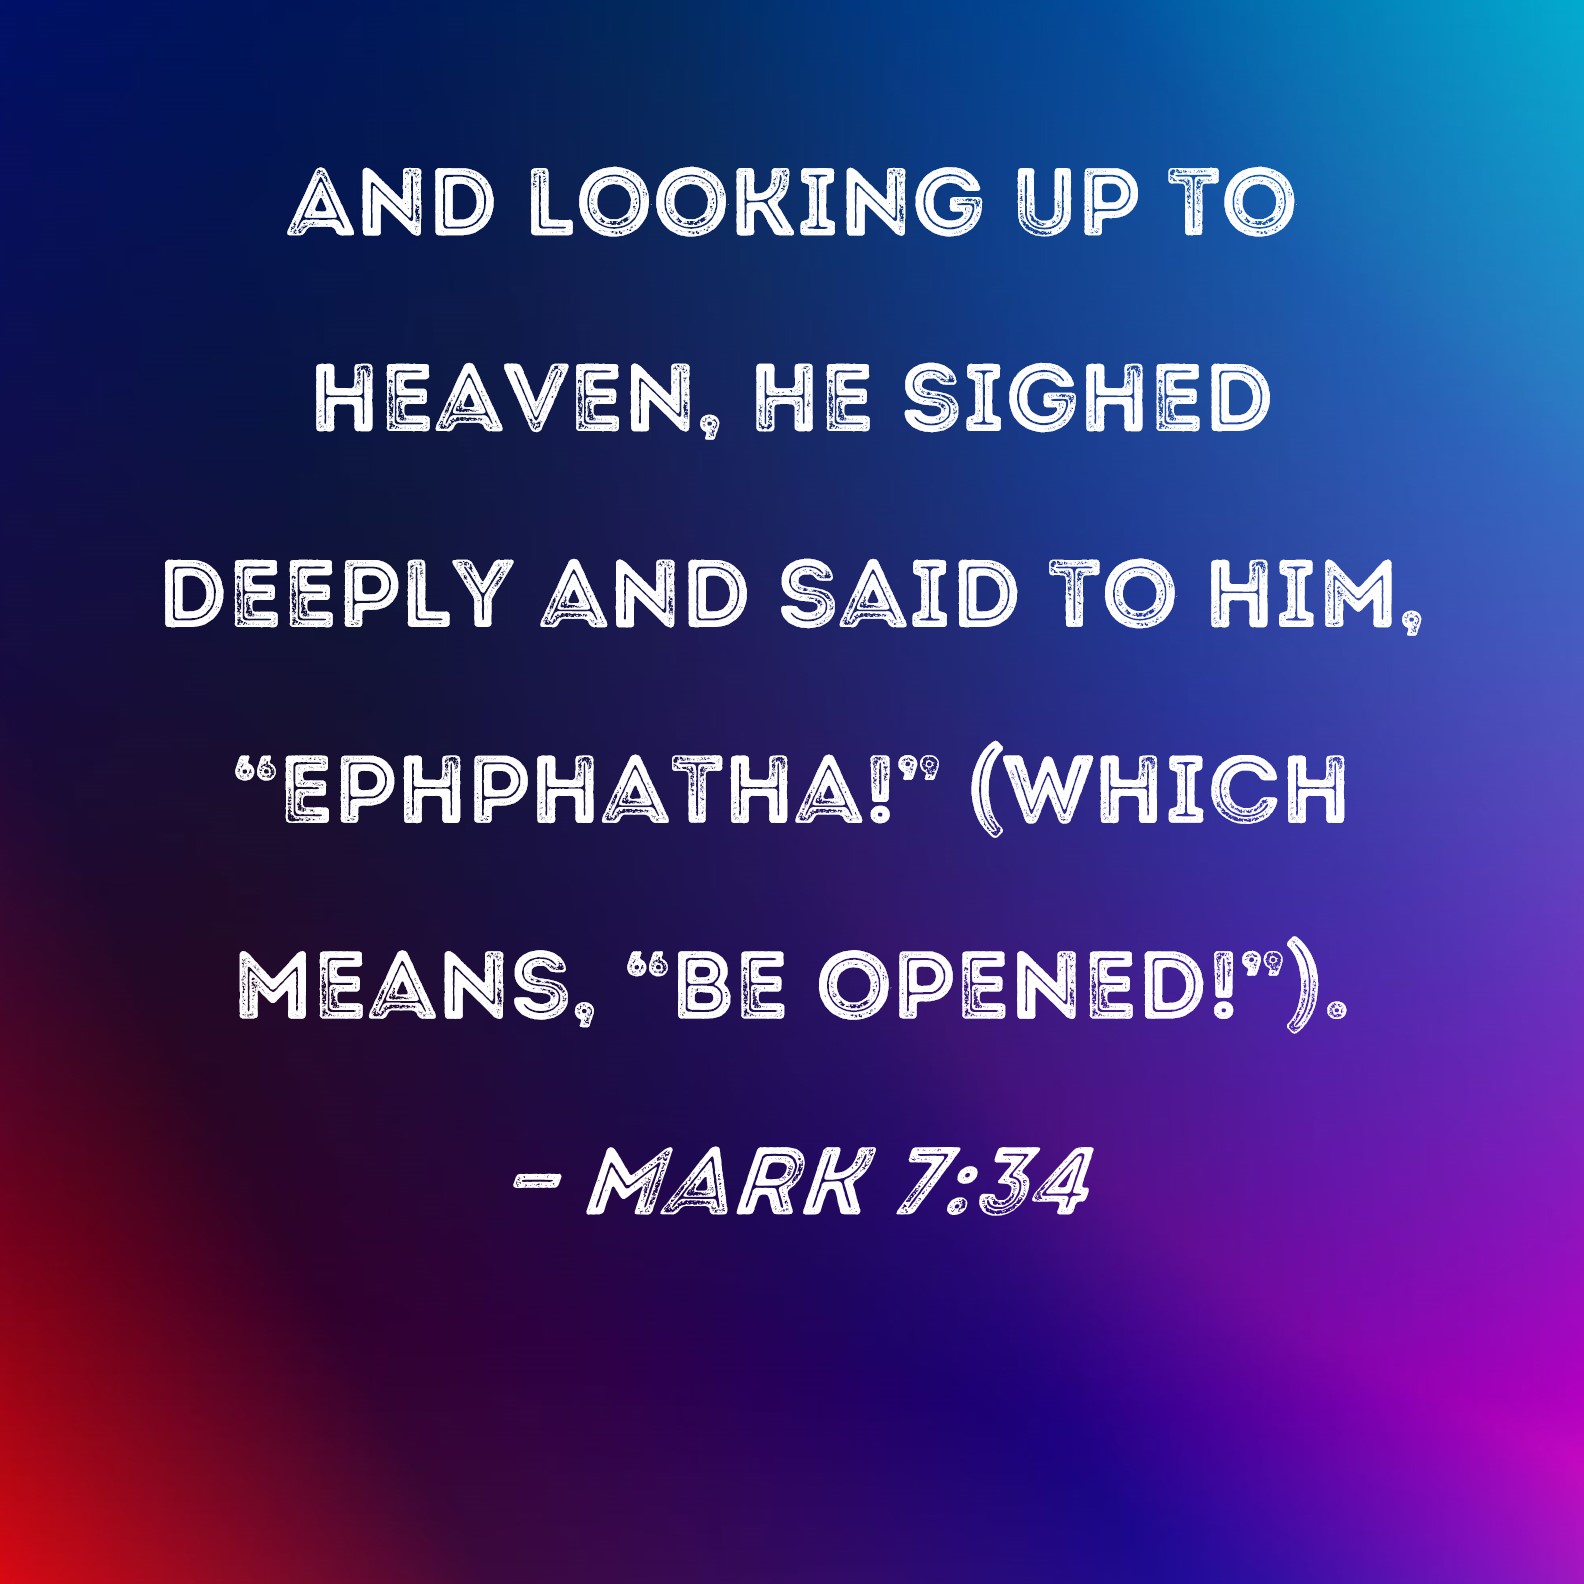 mark-7-34-and-looking-up-to-heaven-he-sighed-deeply-and-said-to-him